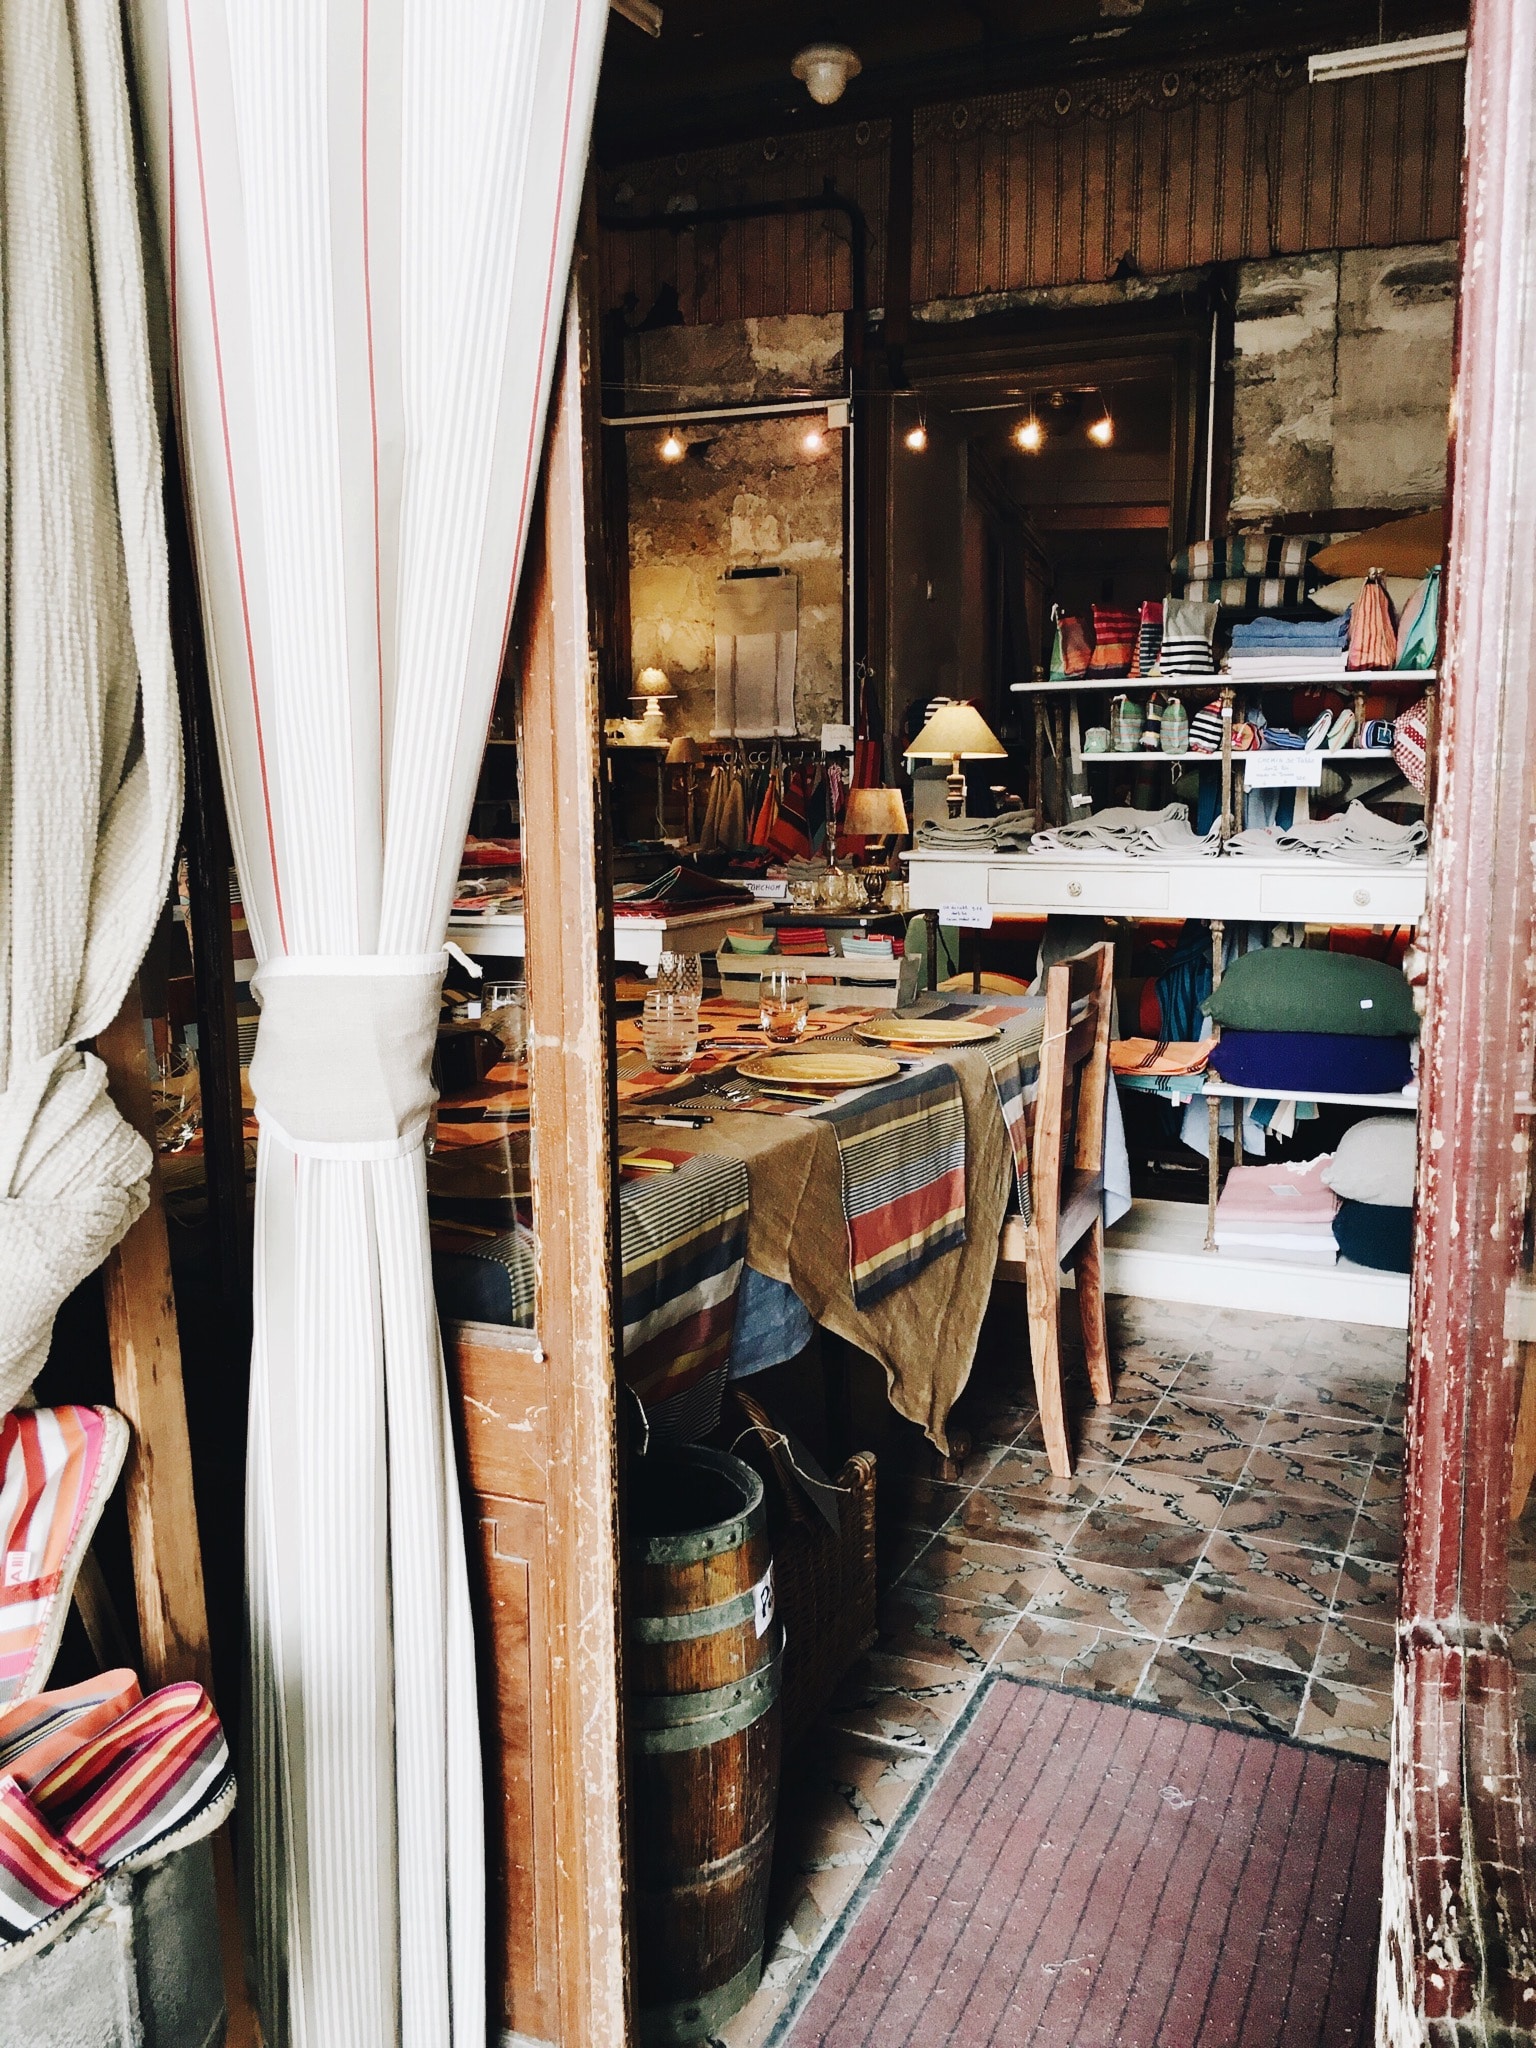 antique shopping in l'isle sur sorgue | 24 hours in provence travel guide by coco kelley